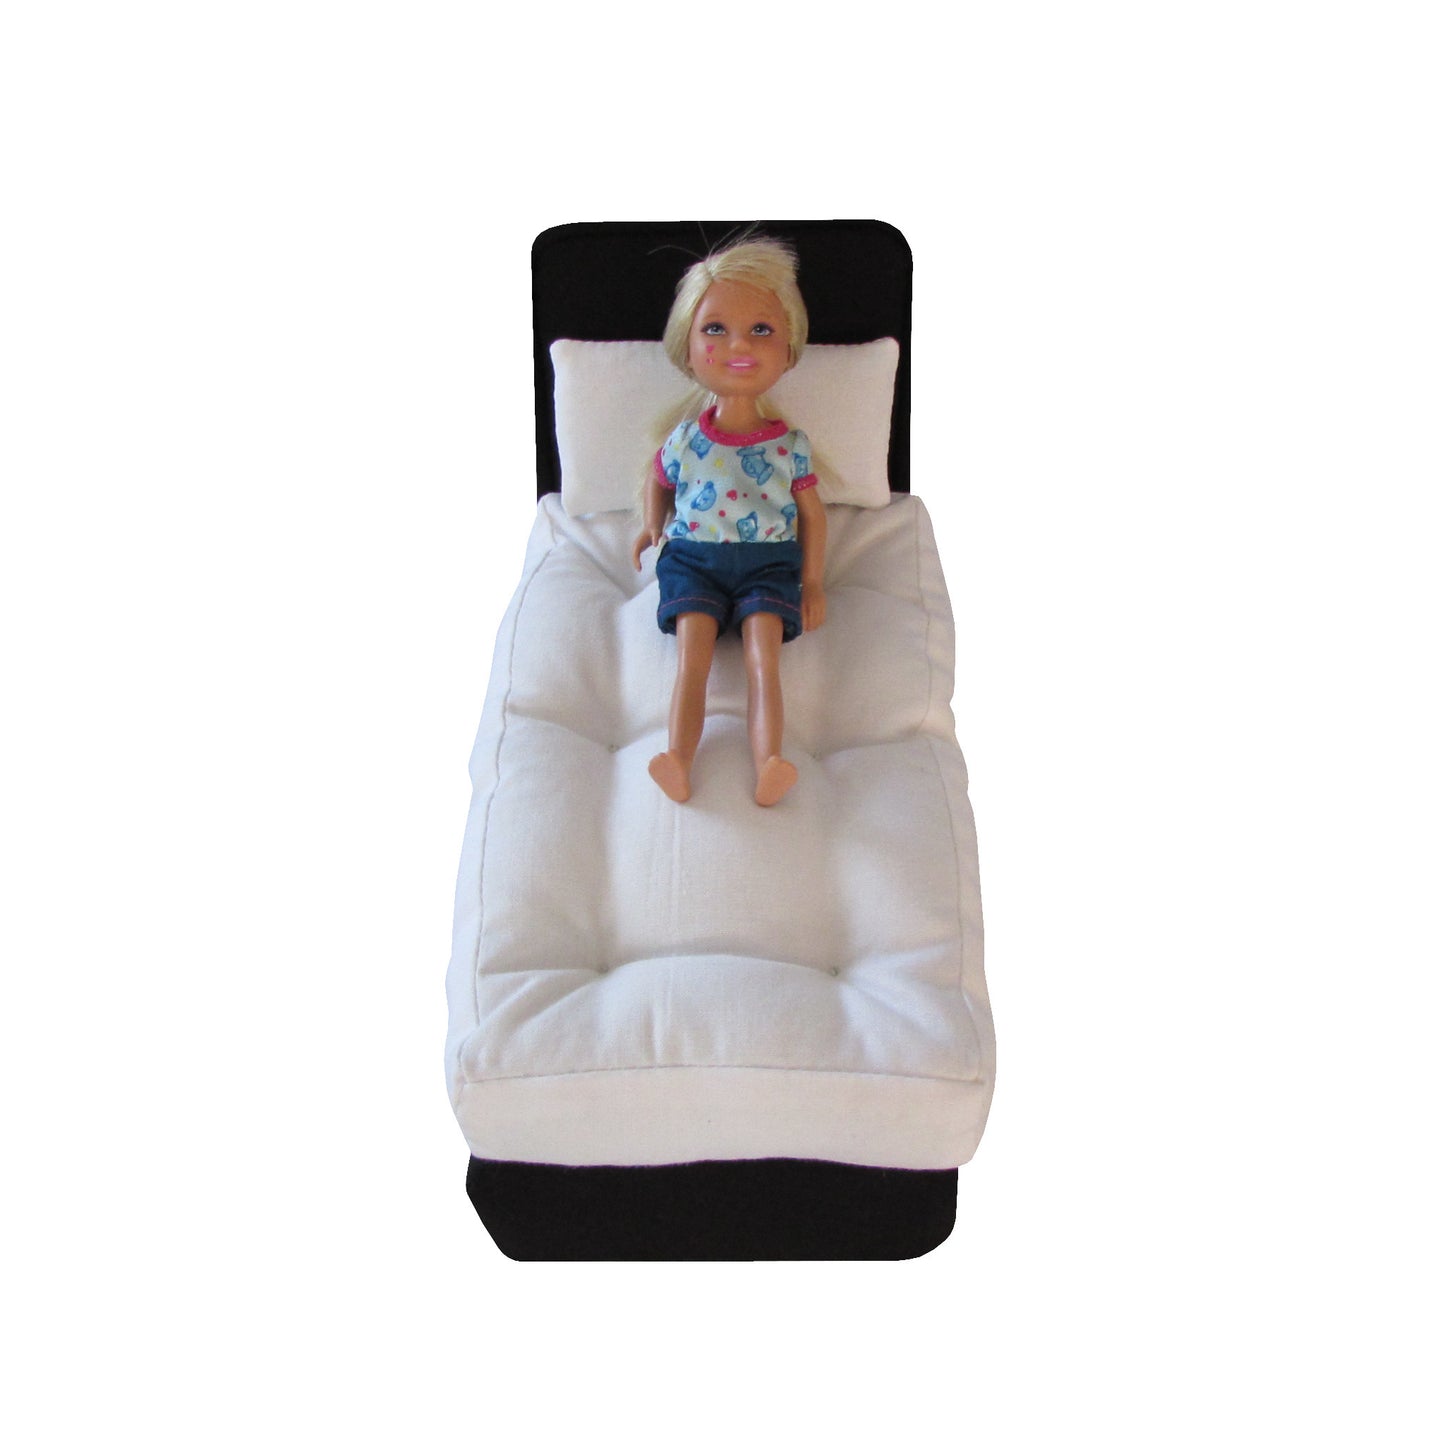 Upholstered Black Doll Bed for 6.5-inch dolls with doll